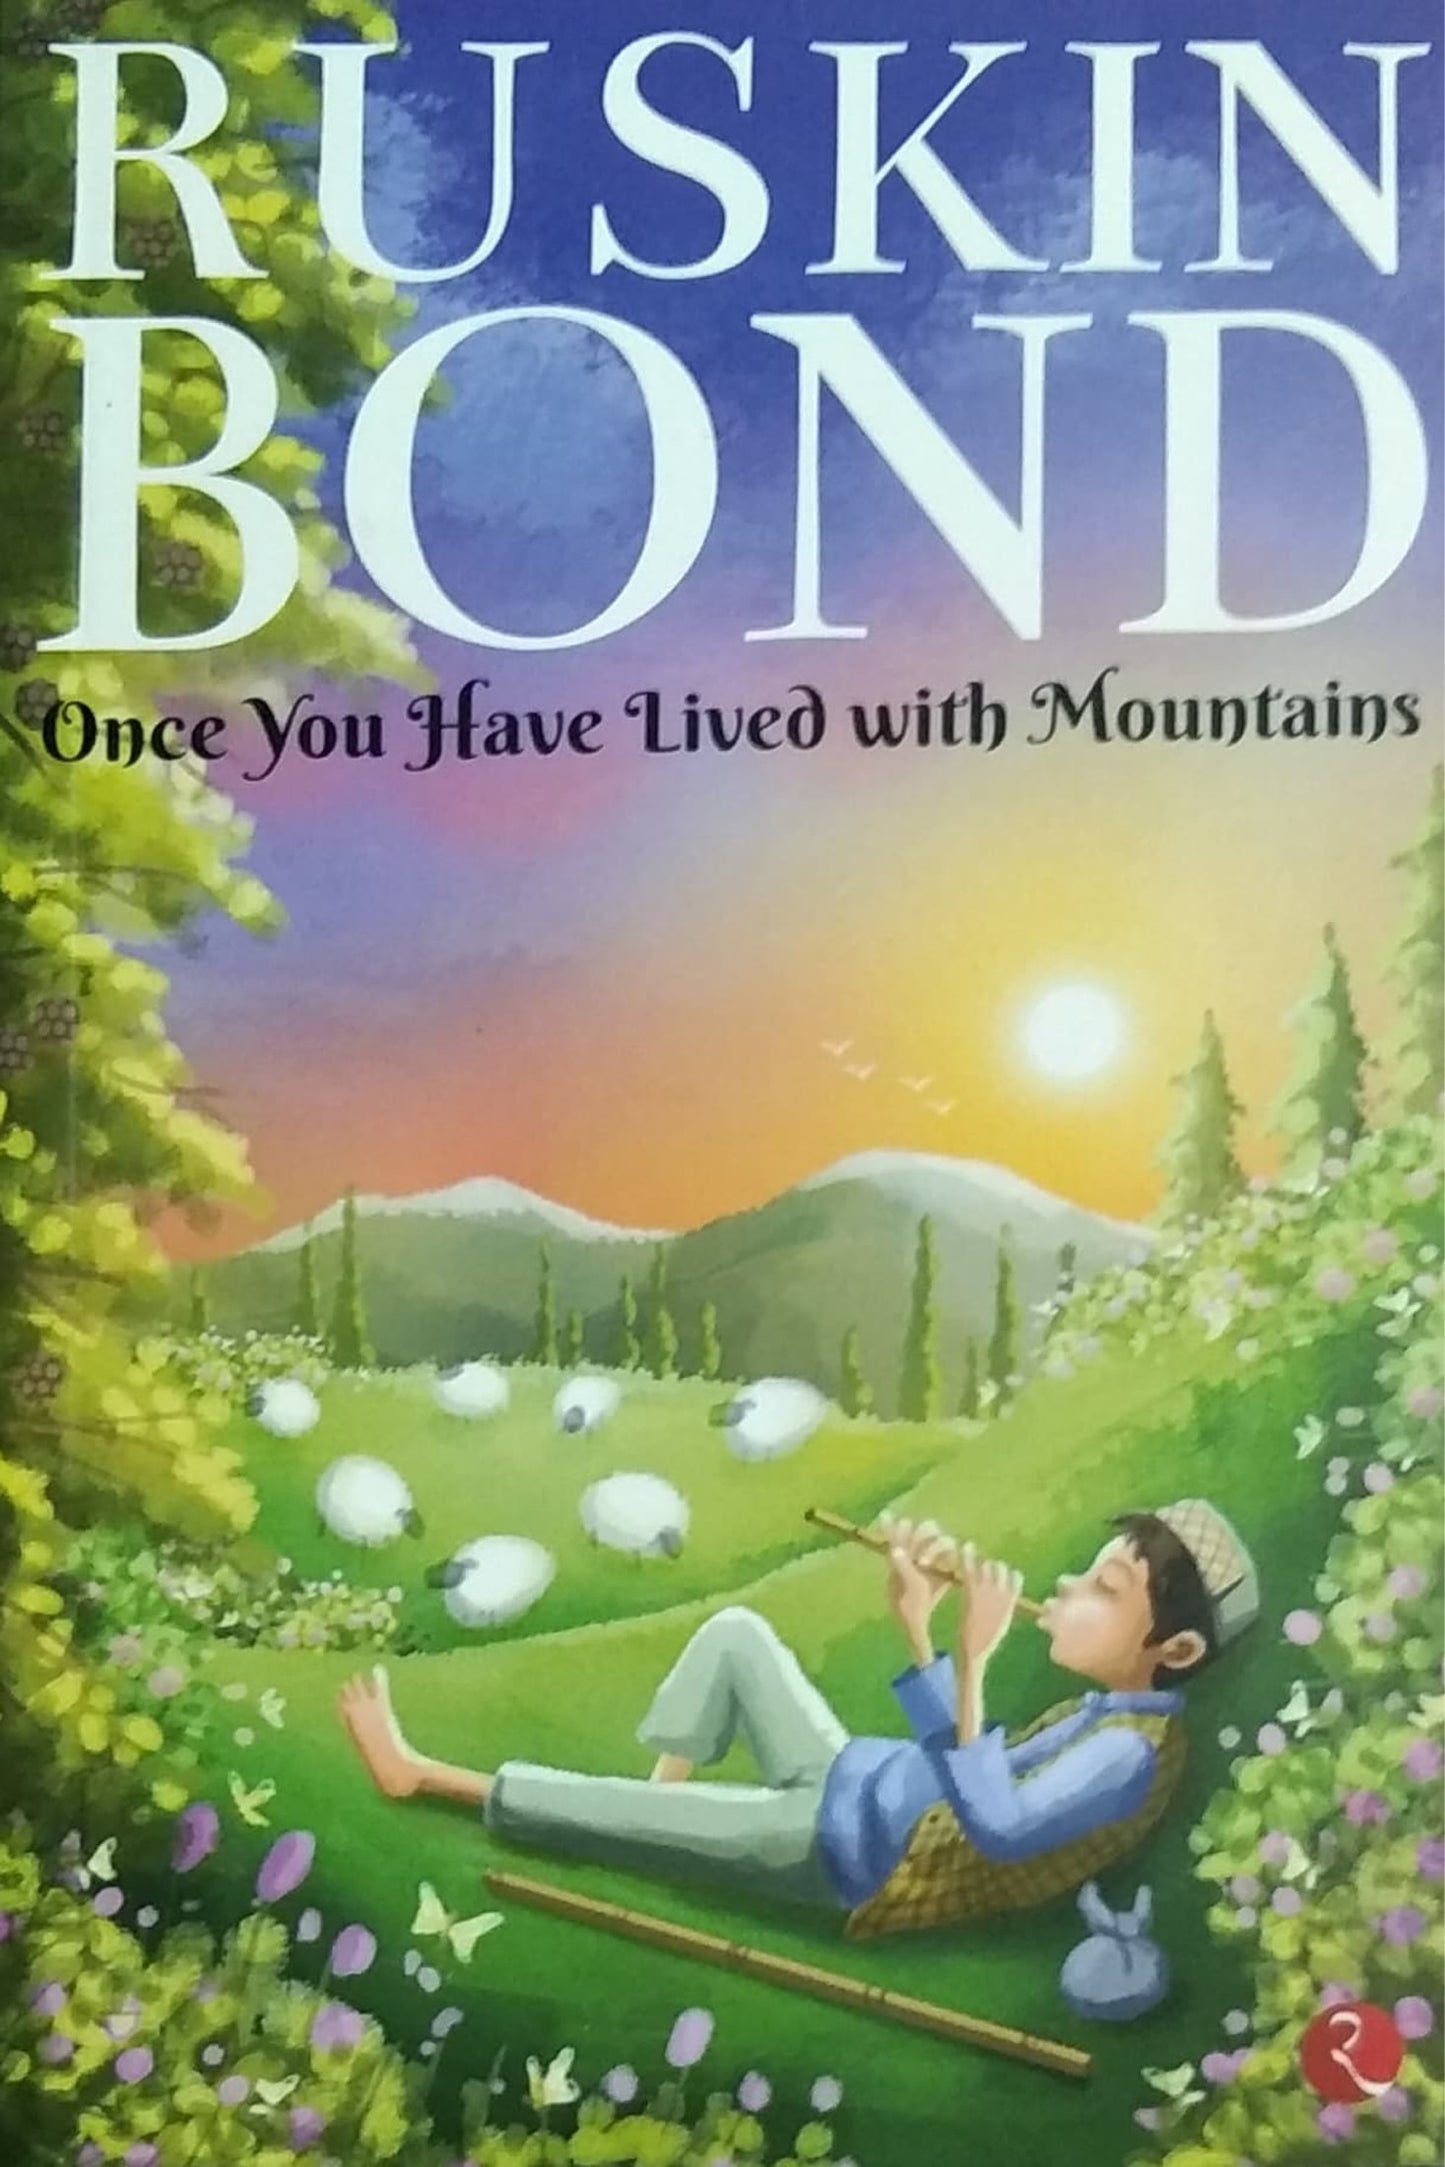 Once You Have Lived with Mountains